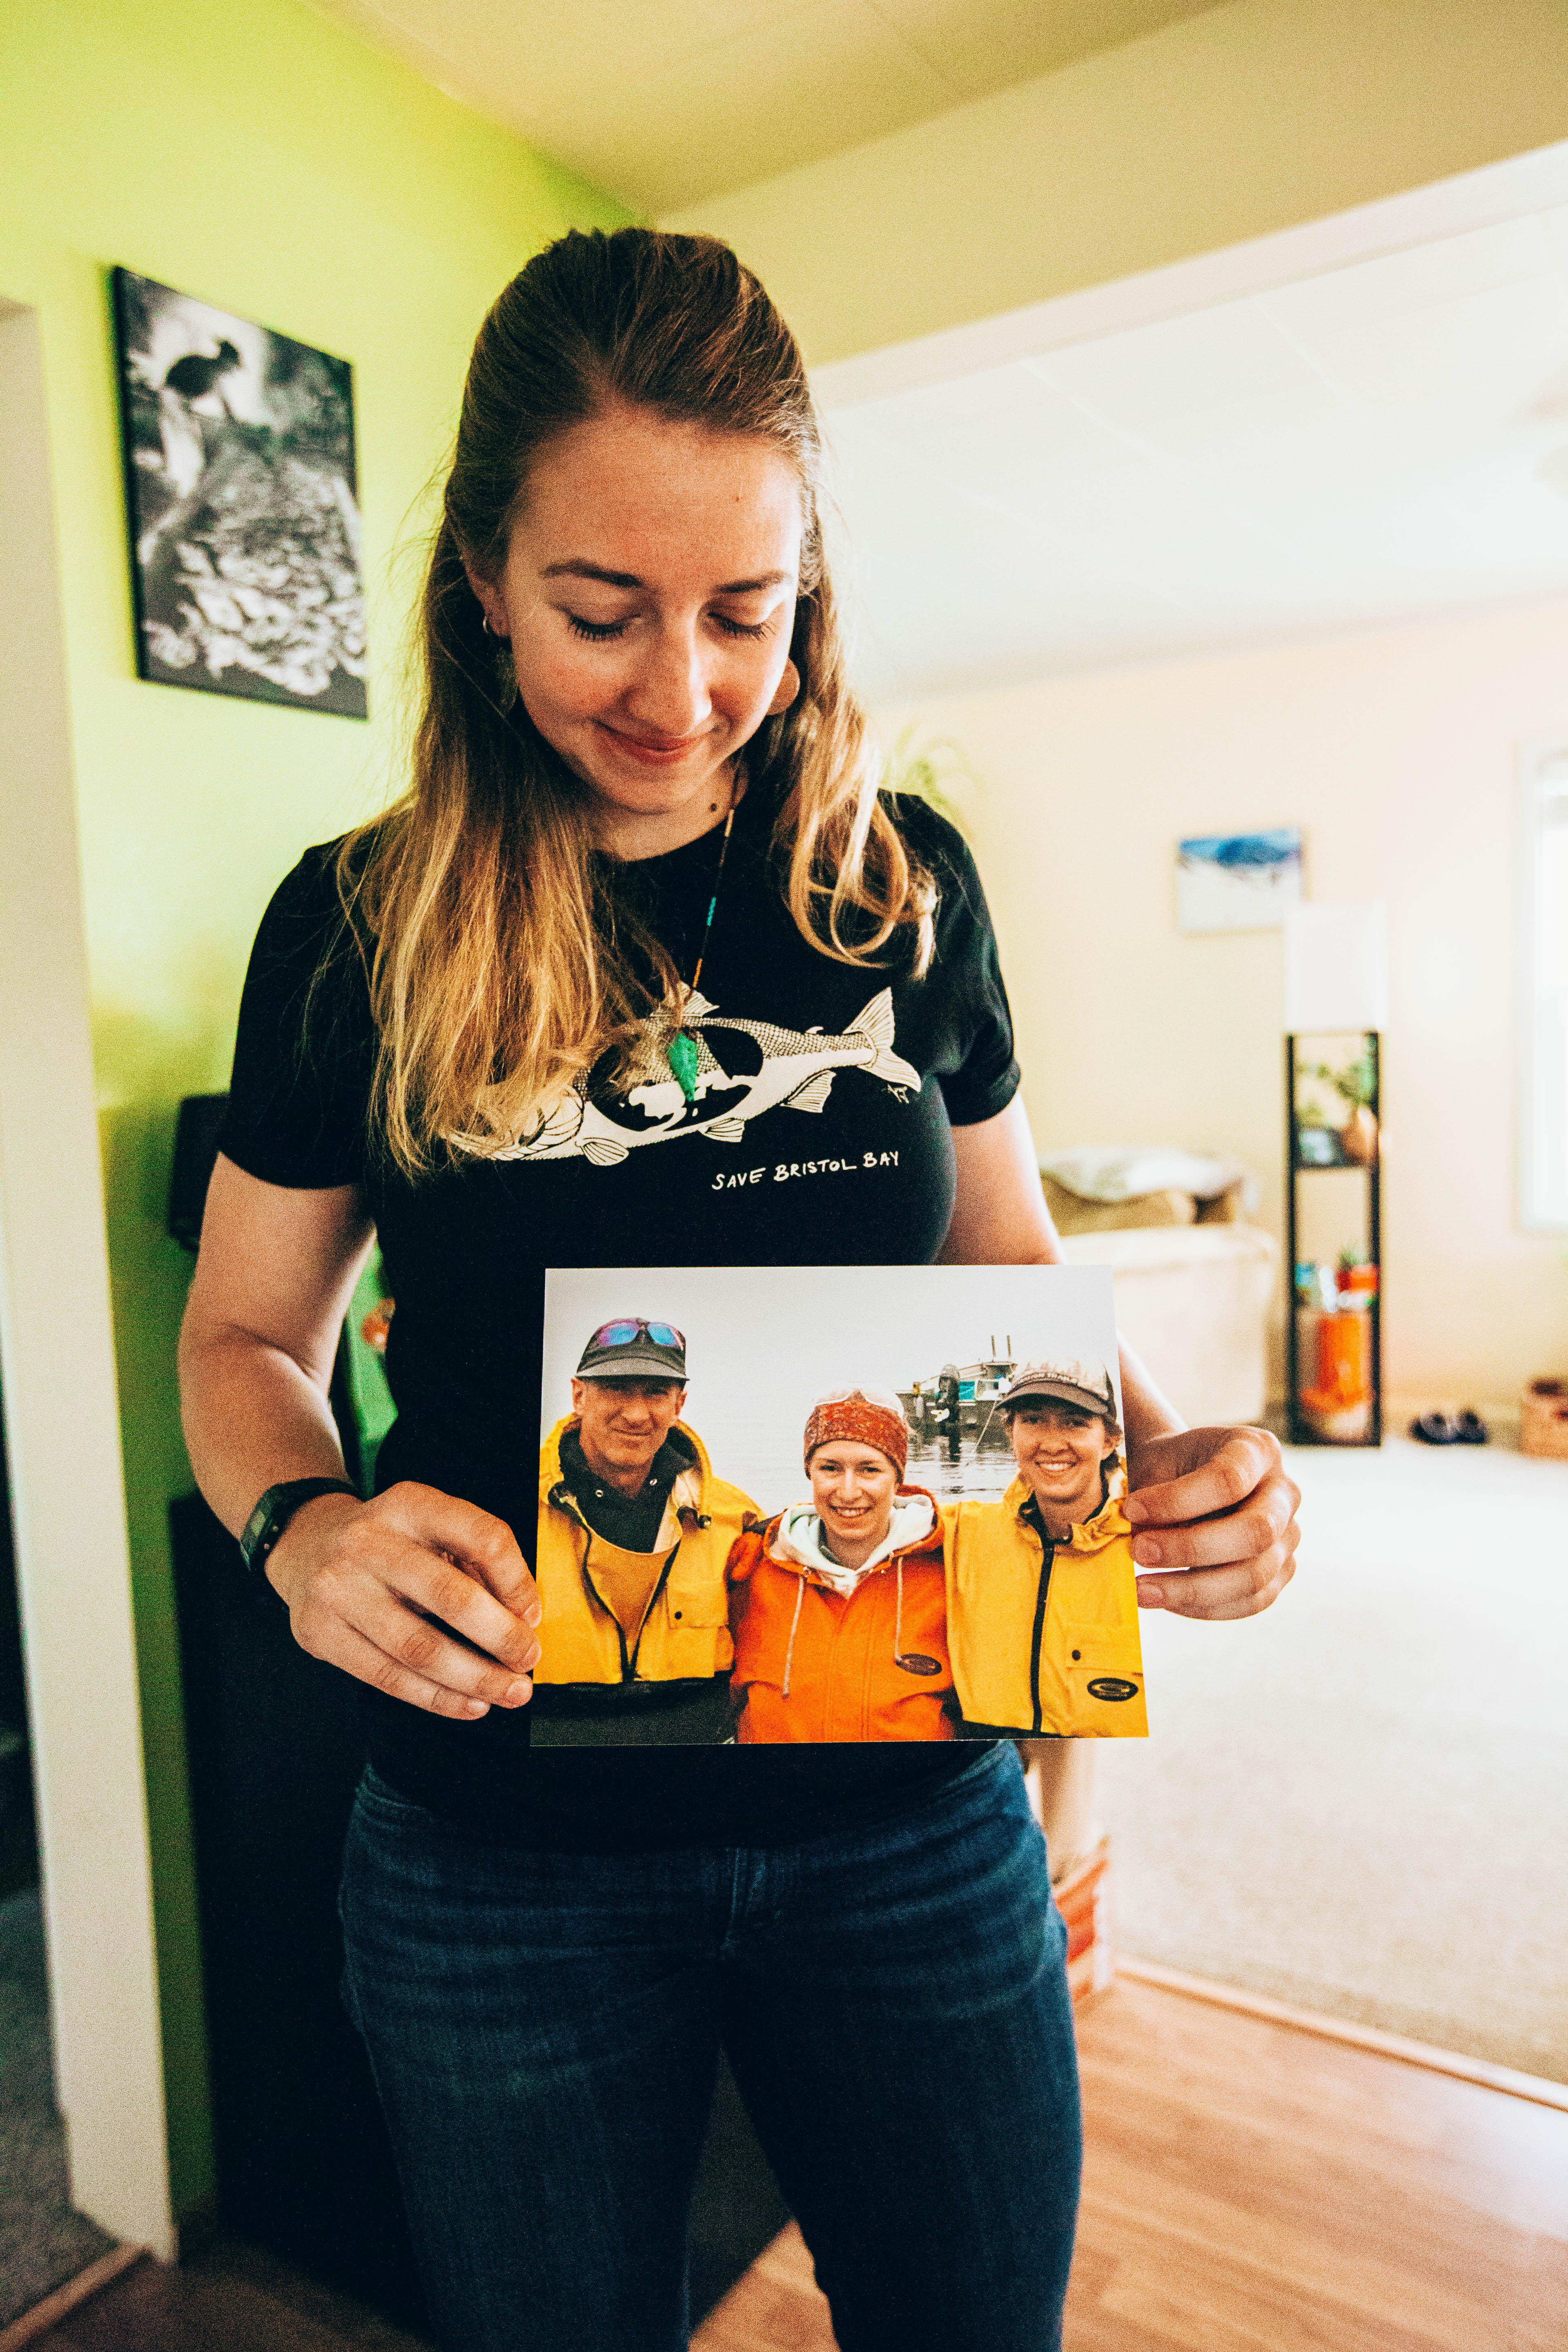 Shelly Larsen holds up a photo of her father, sister and herself in her kitchen at her home in Bellingham, Wash., on Thursday, May 2, 2019. (Photo by Regan Bervar)